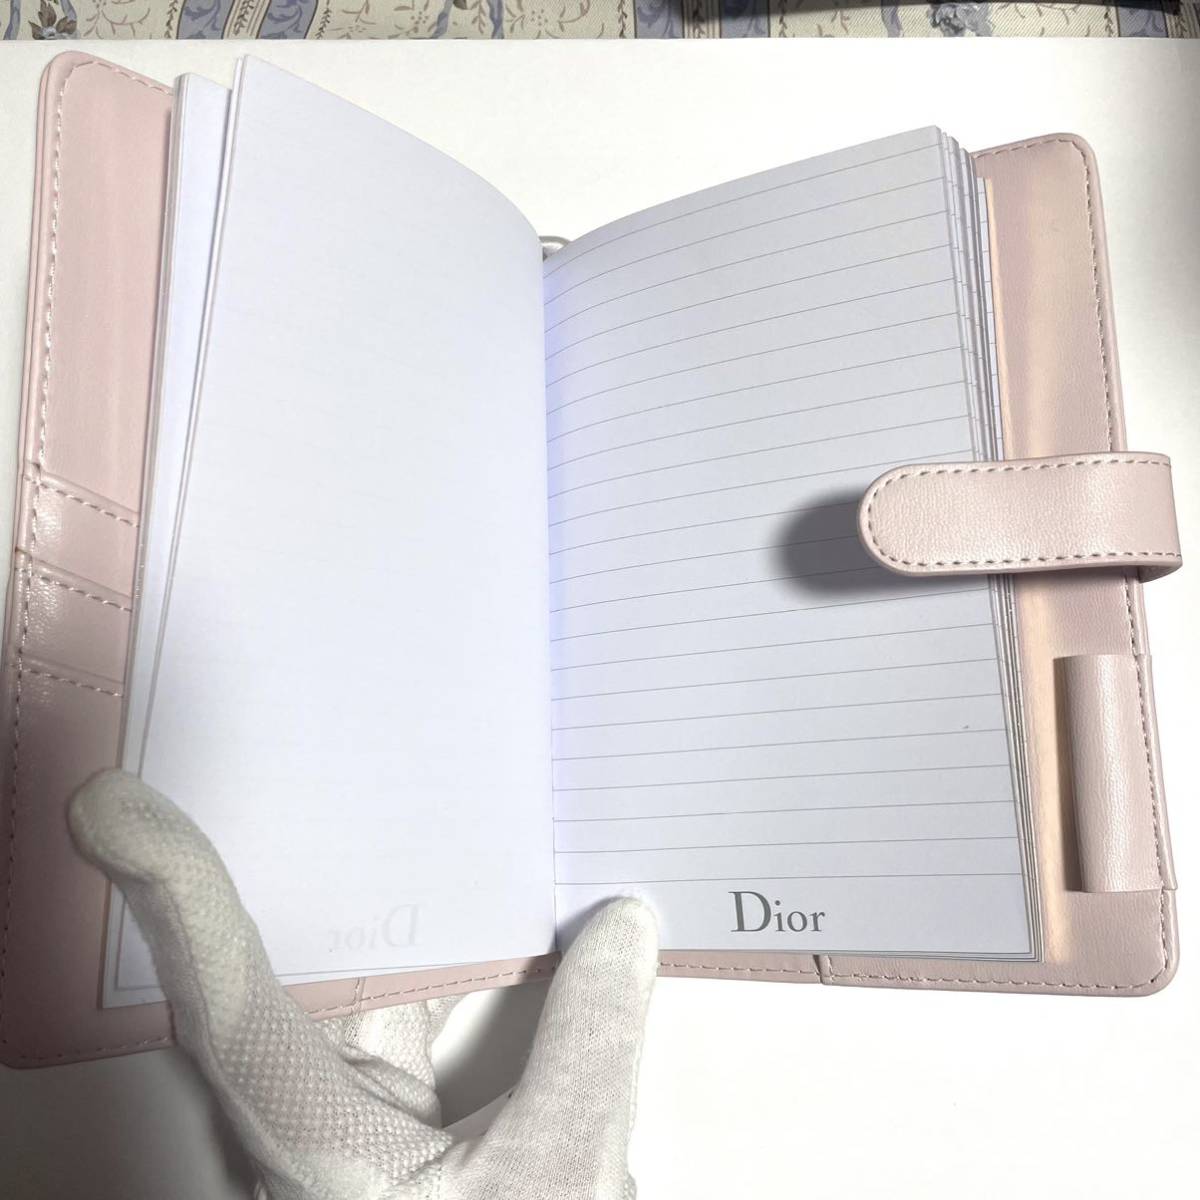 Christian Dior Christian Dior notebook Note Novelty not for sale pink.